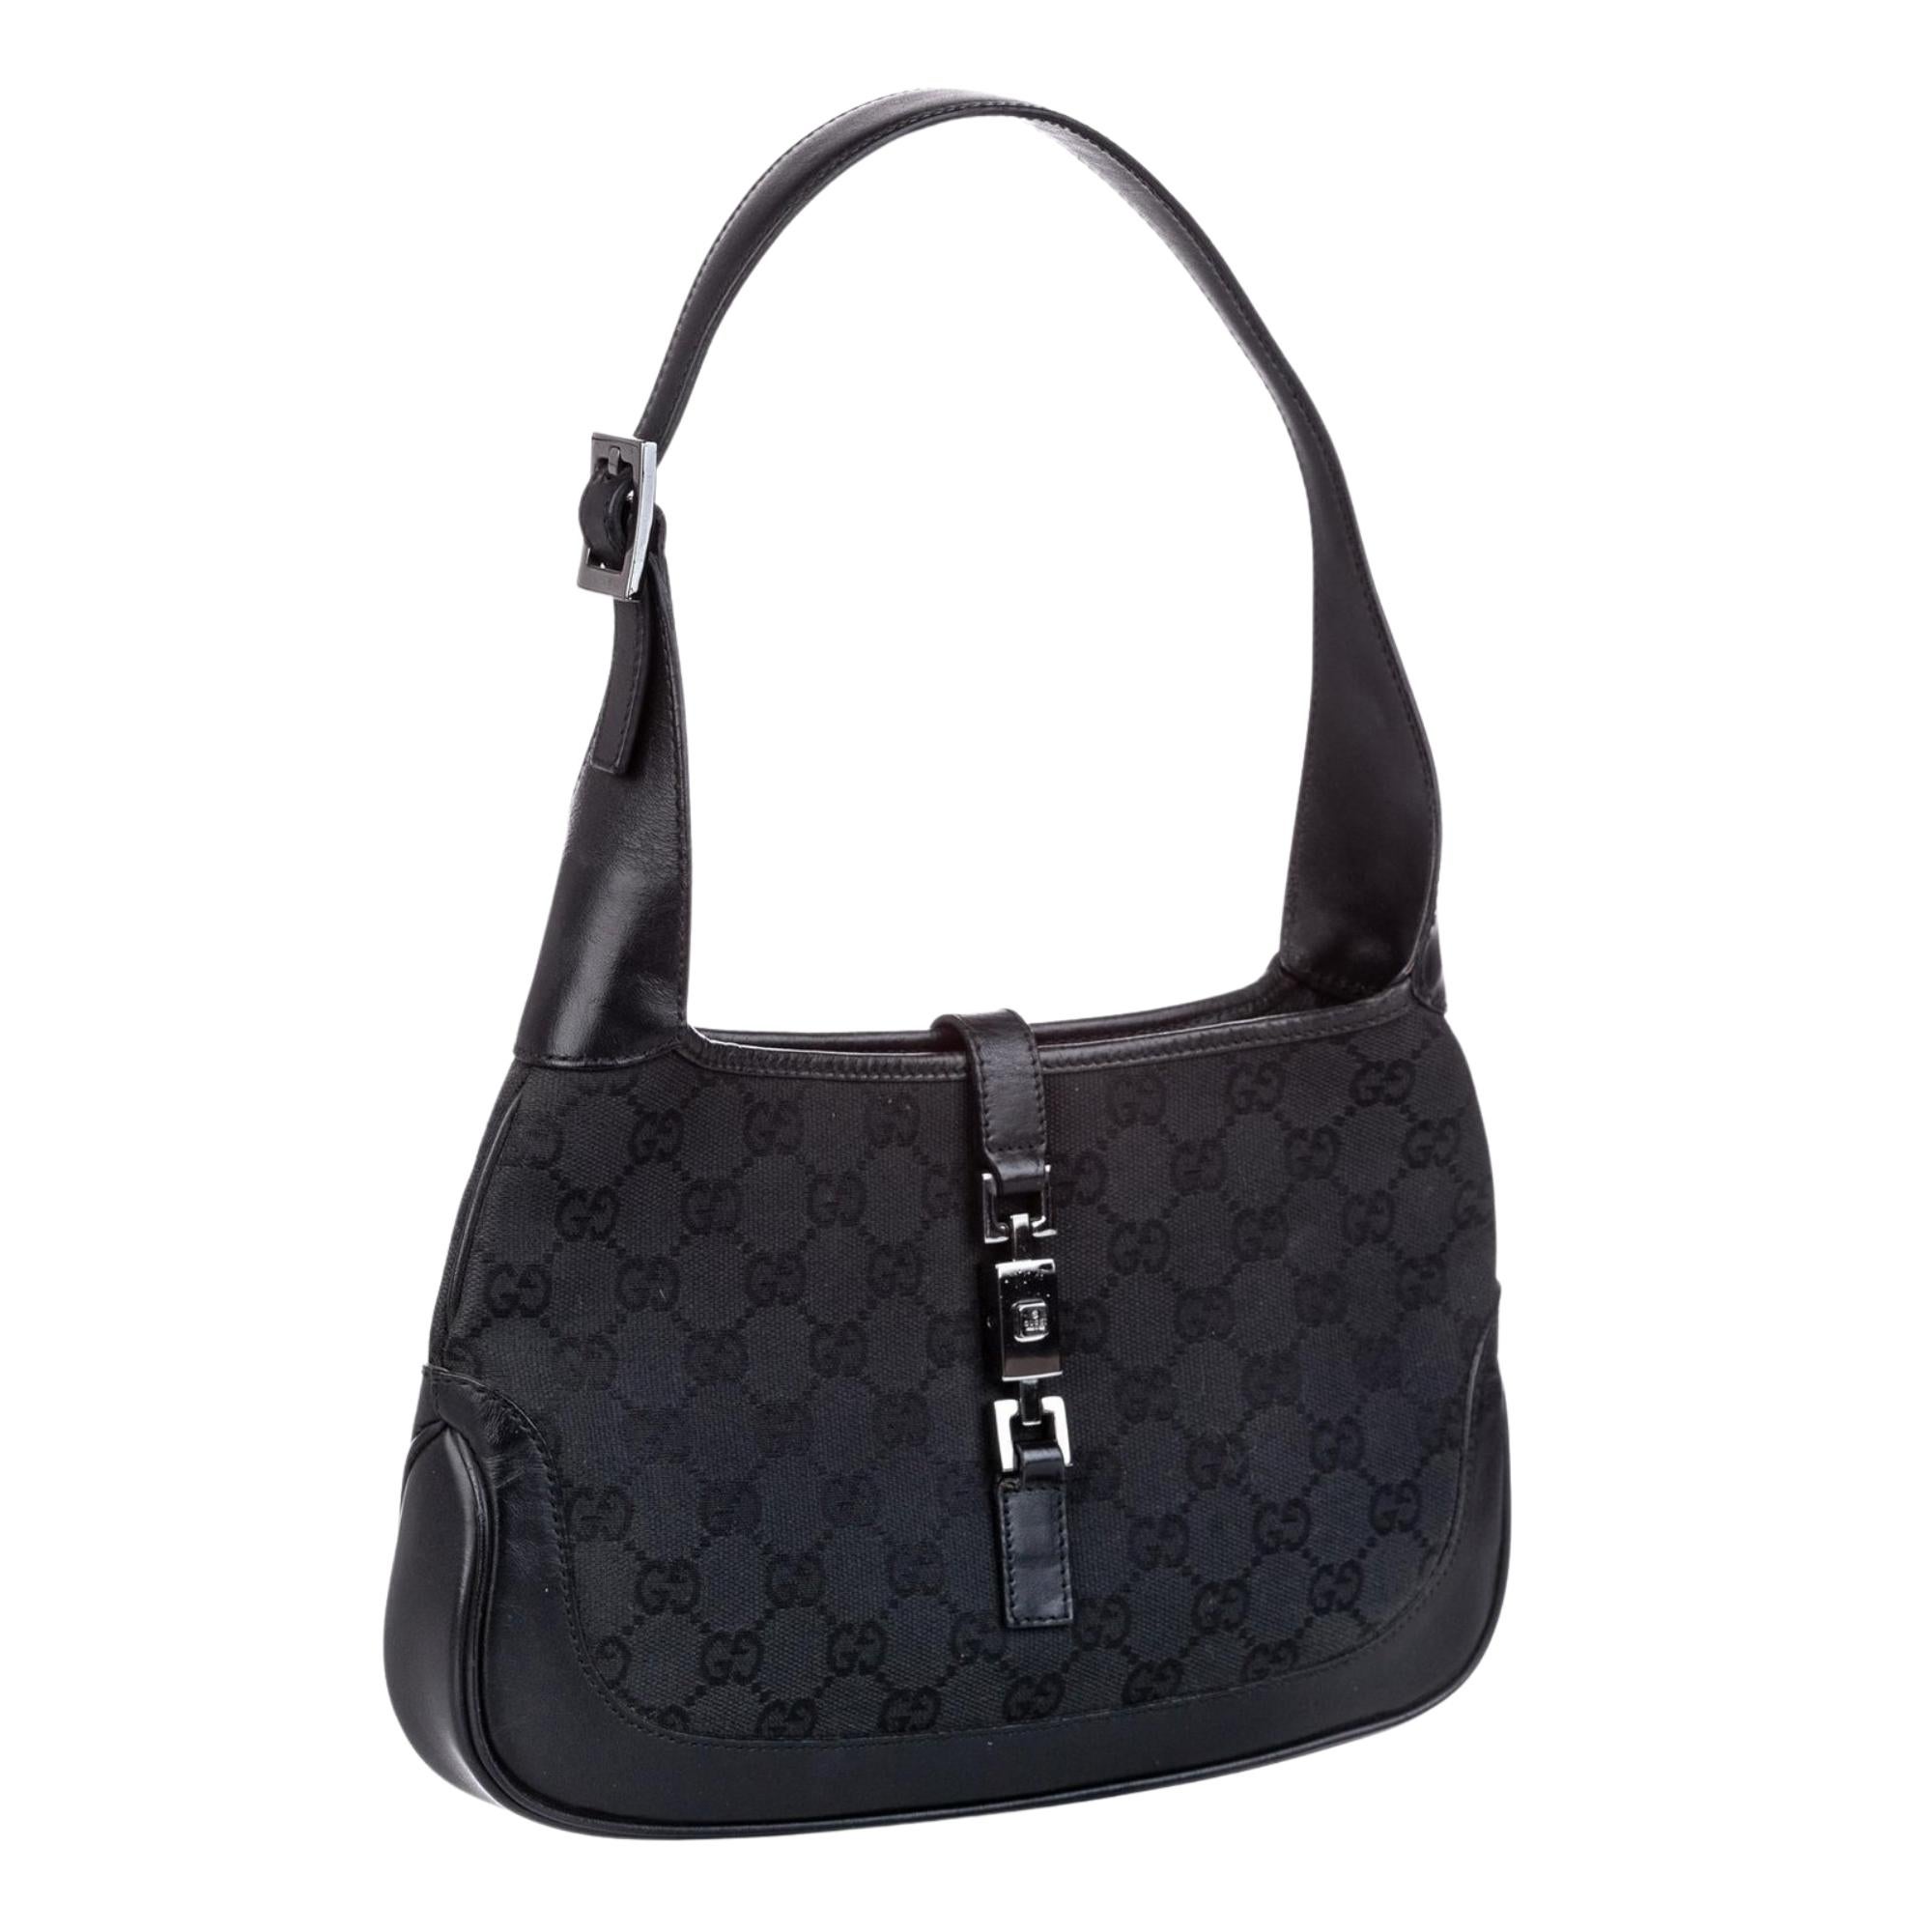 This Gucci Jackie bag is made of black monogram GG canvas. The bag features black leather finishes including the looping flat leather shoulder strap, base and pipping. The bag is finished with a crossover strap with a silver piston lock that opens